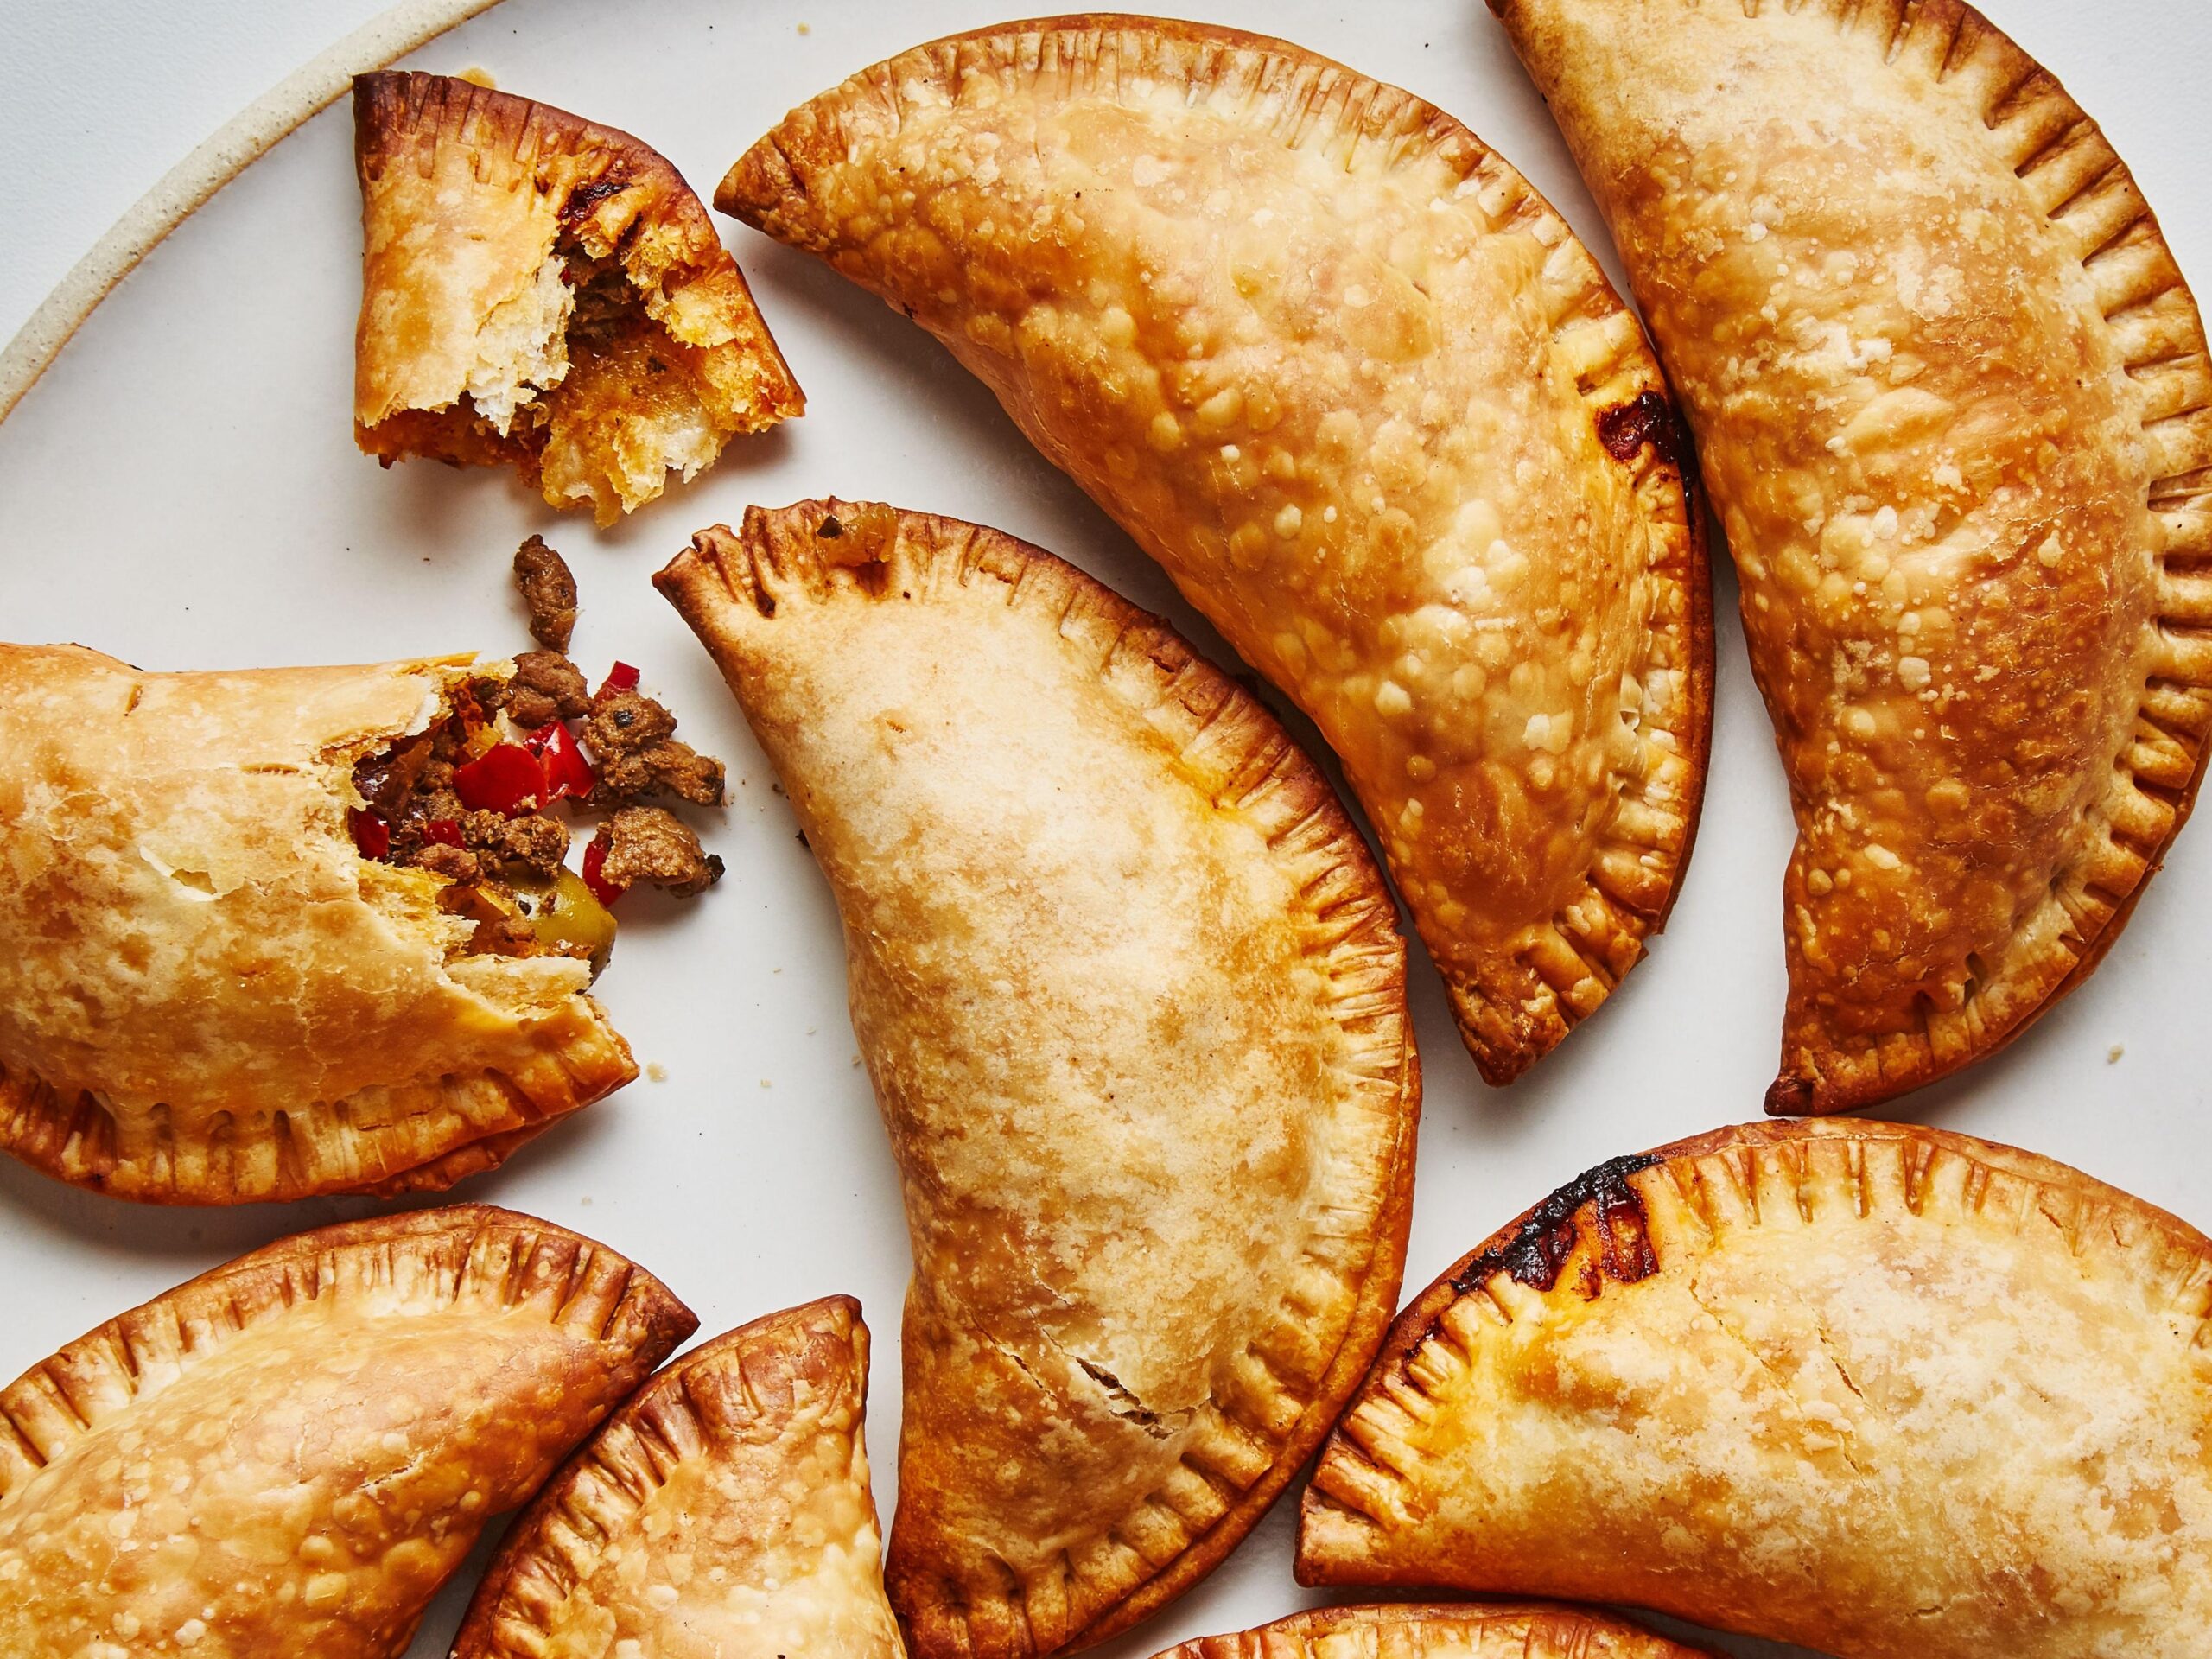  Perfectly crispy on the outside, warm and flavorful on the inside - this is the ultimate empanada experience.